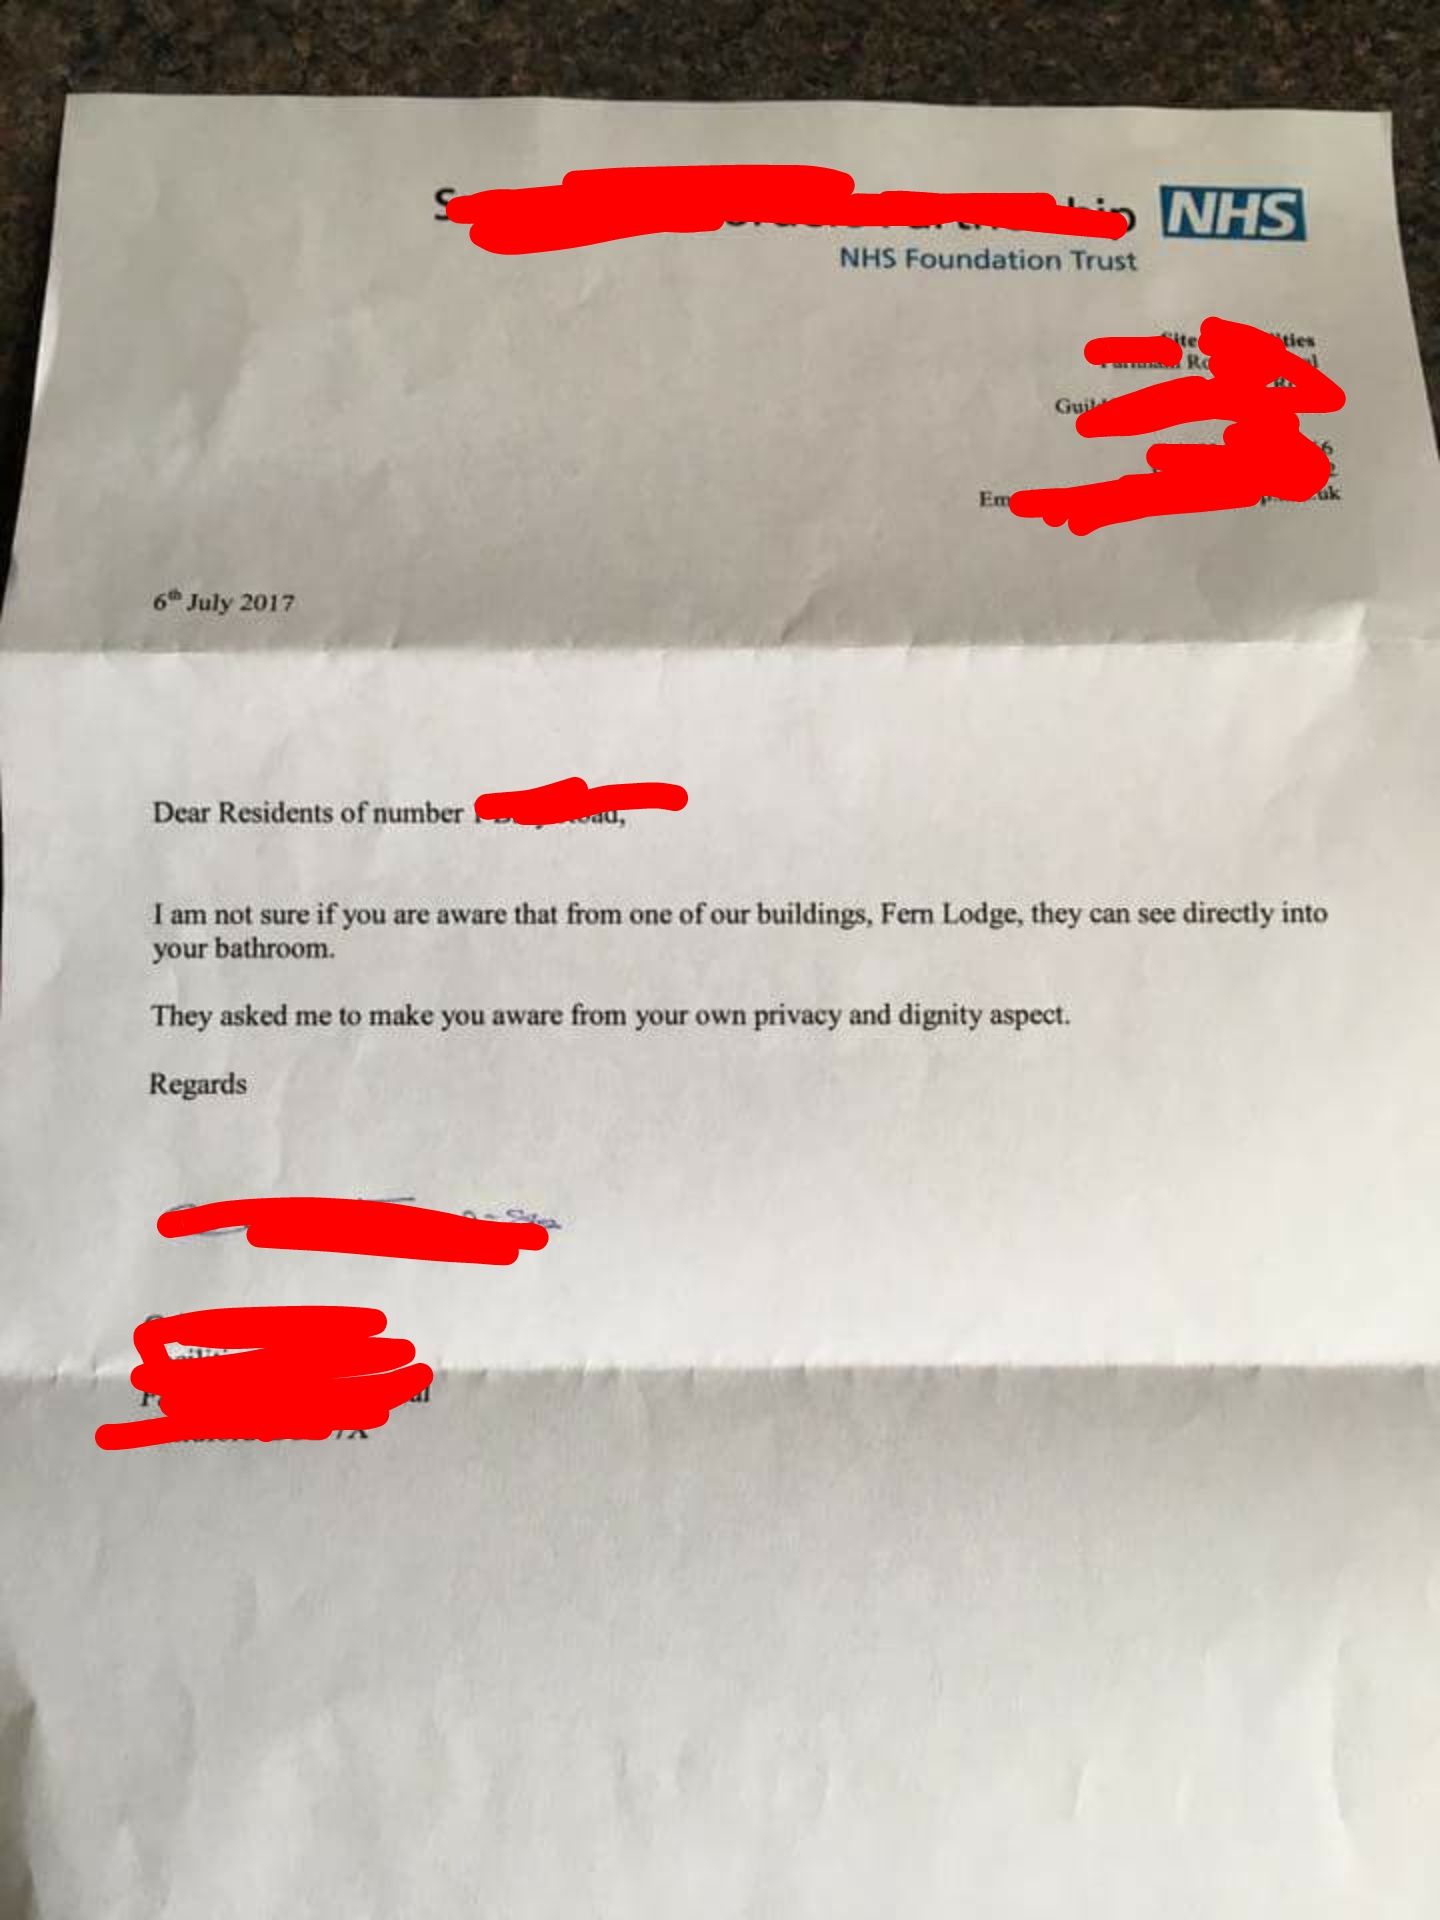 My friend just received this letter